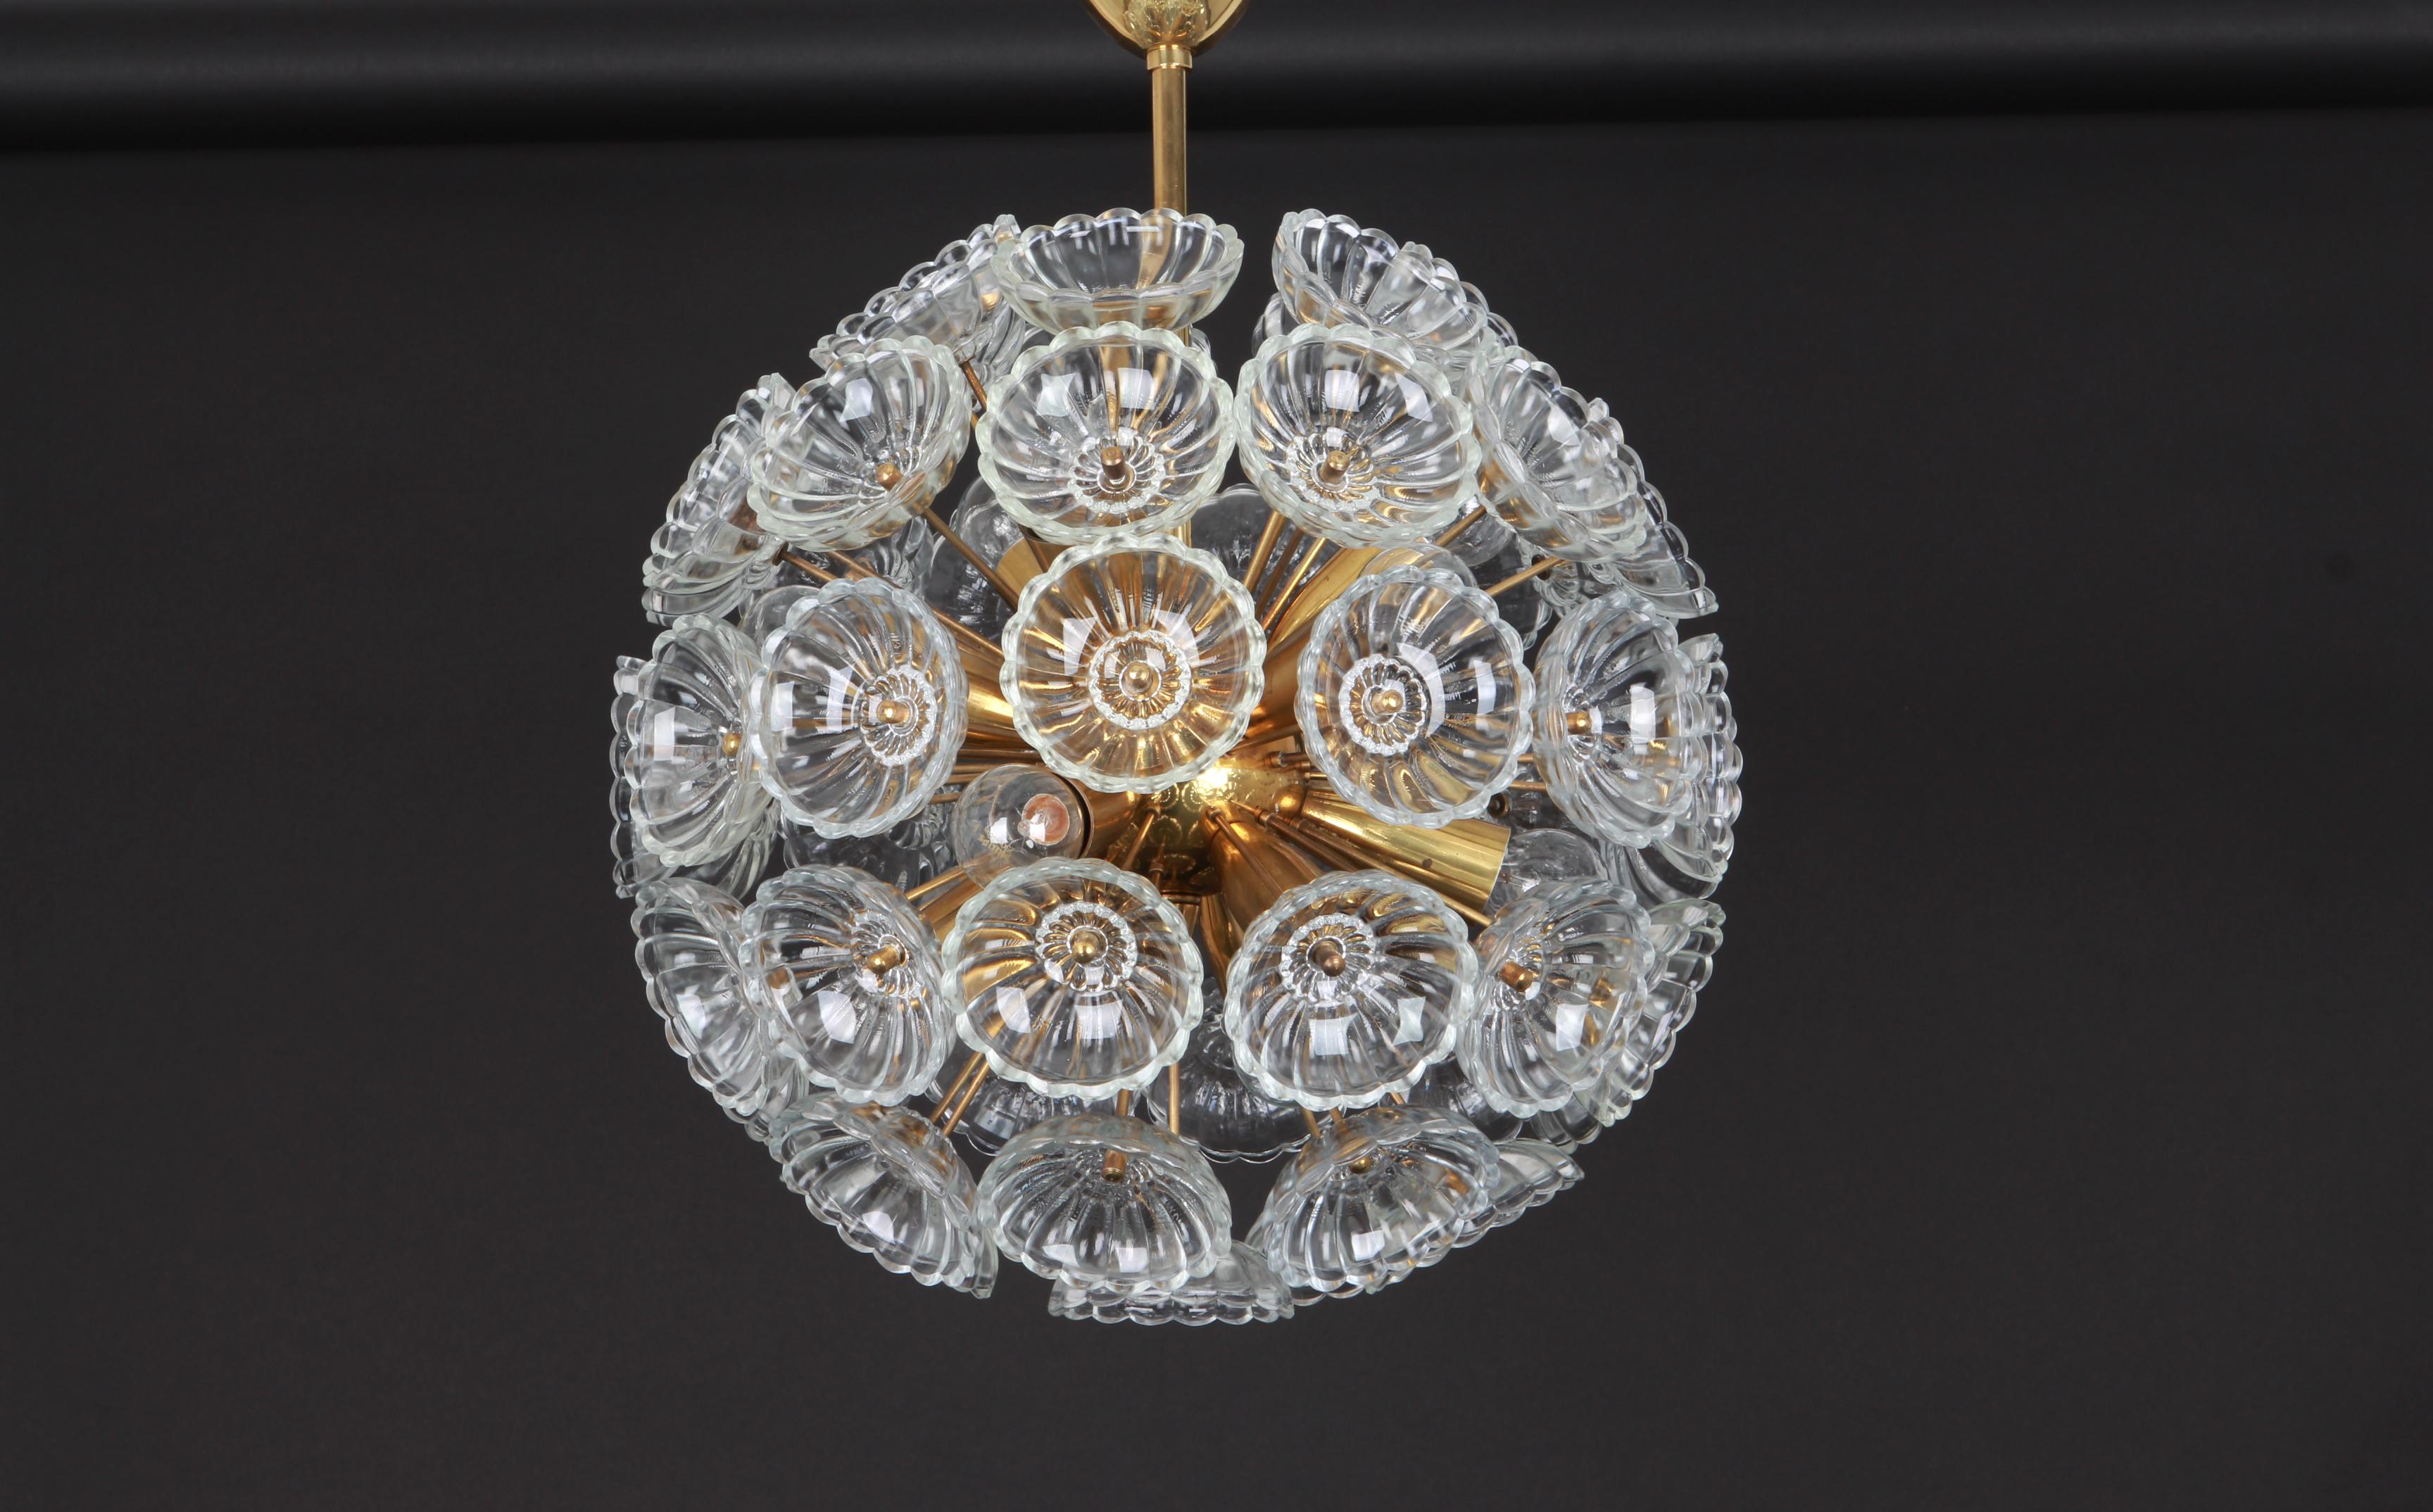 1 of 2 Stunning Floral Glass and Brass Sputnik Chandeliers, Germany, 1960s For Sale 4